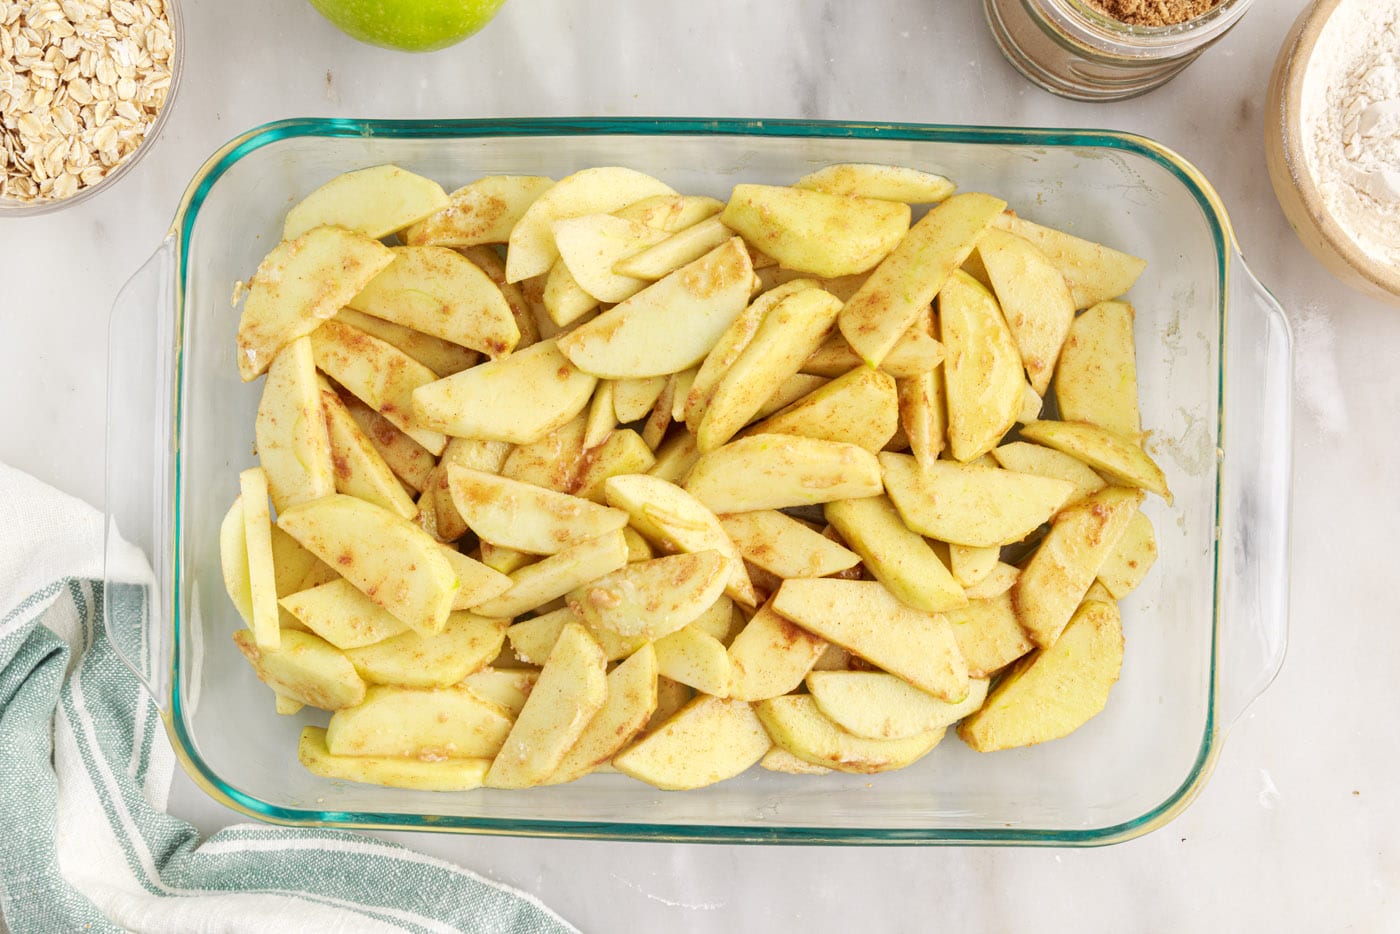 sliced apples with brown sugar and cinnamon in a baking dish